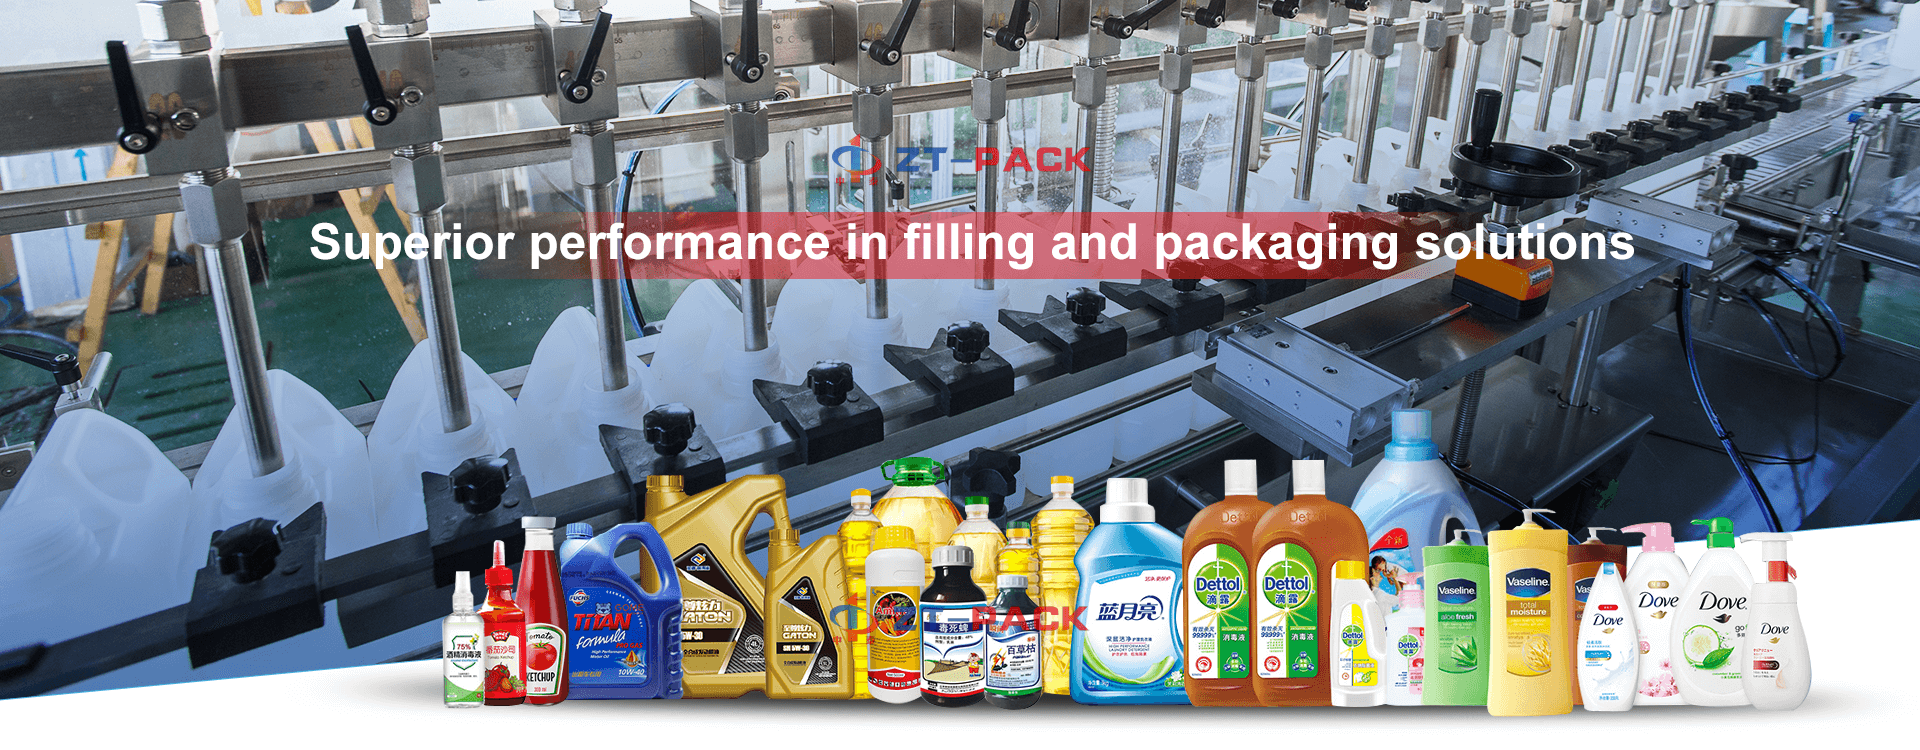 disinfectant filling machine suppliers